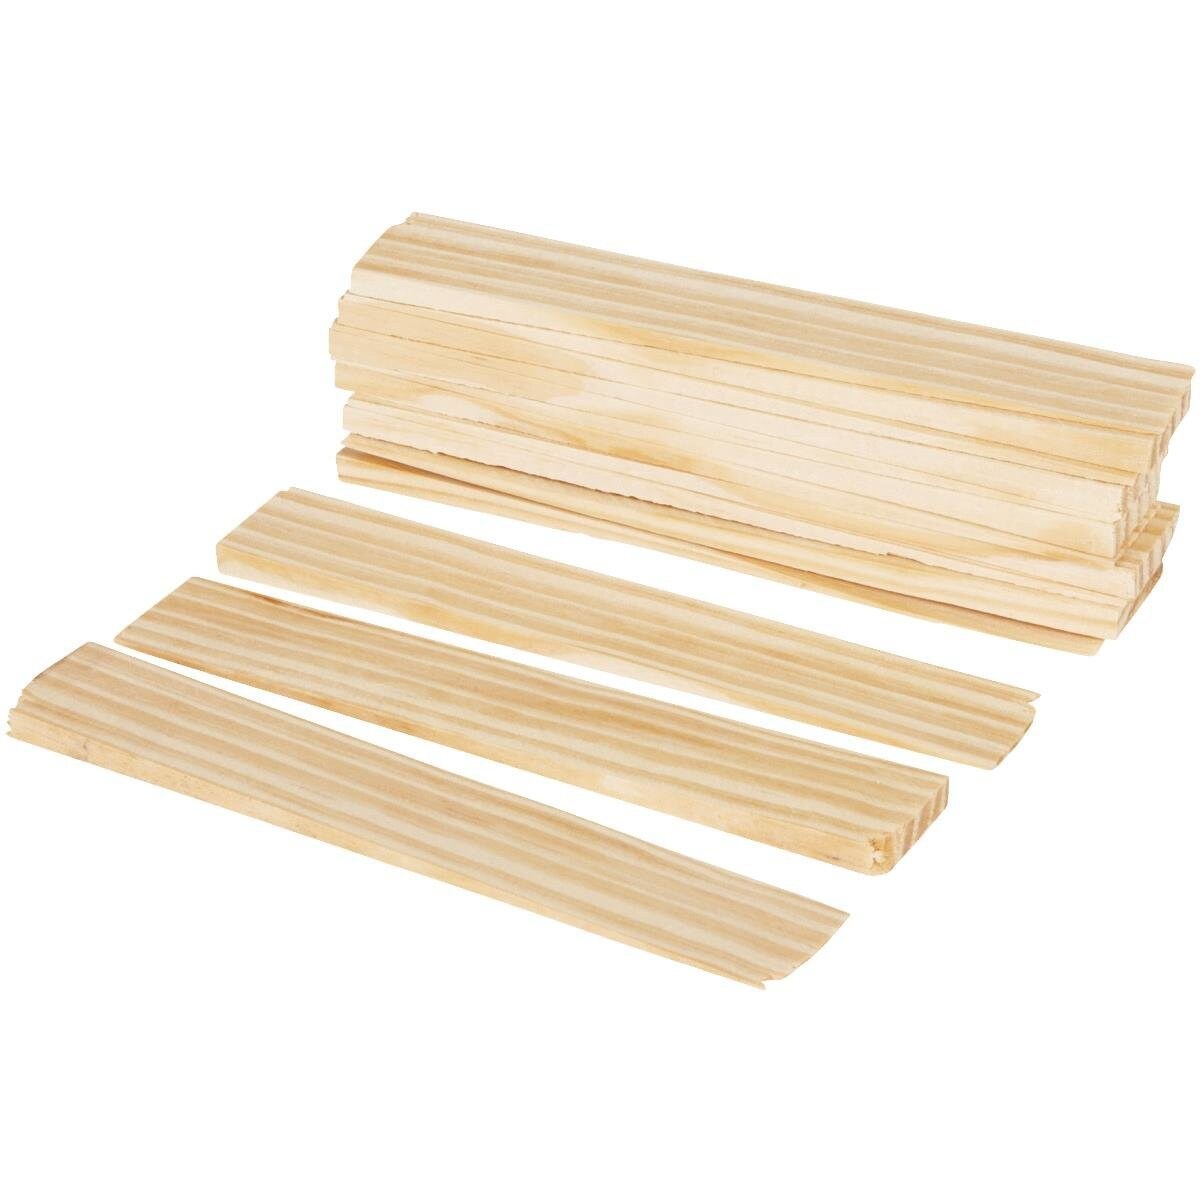 Nelson Wood Pine Shims 8 12 Pack - Kiln Dried Wood - Case of 36 (Total 432  Shim